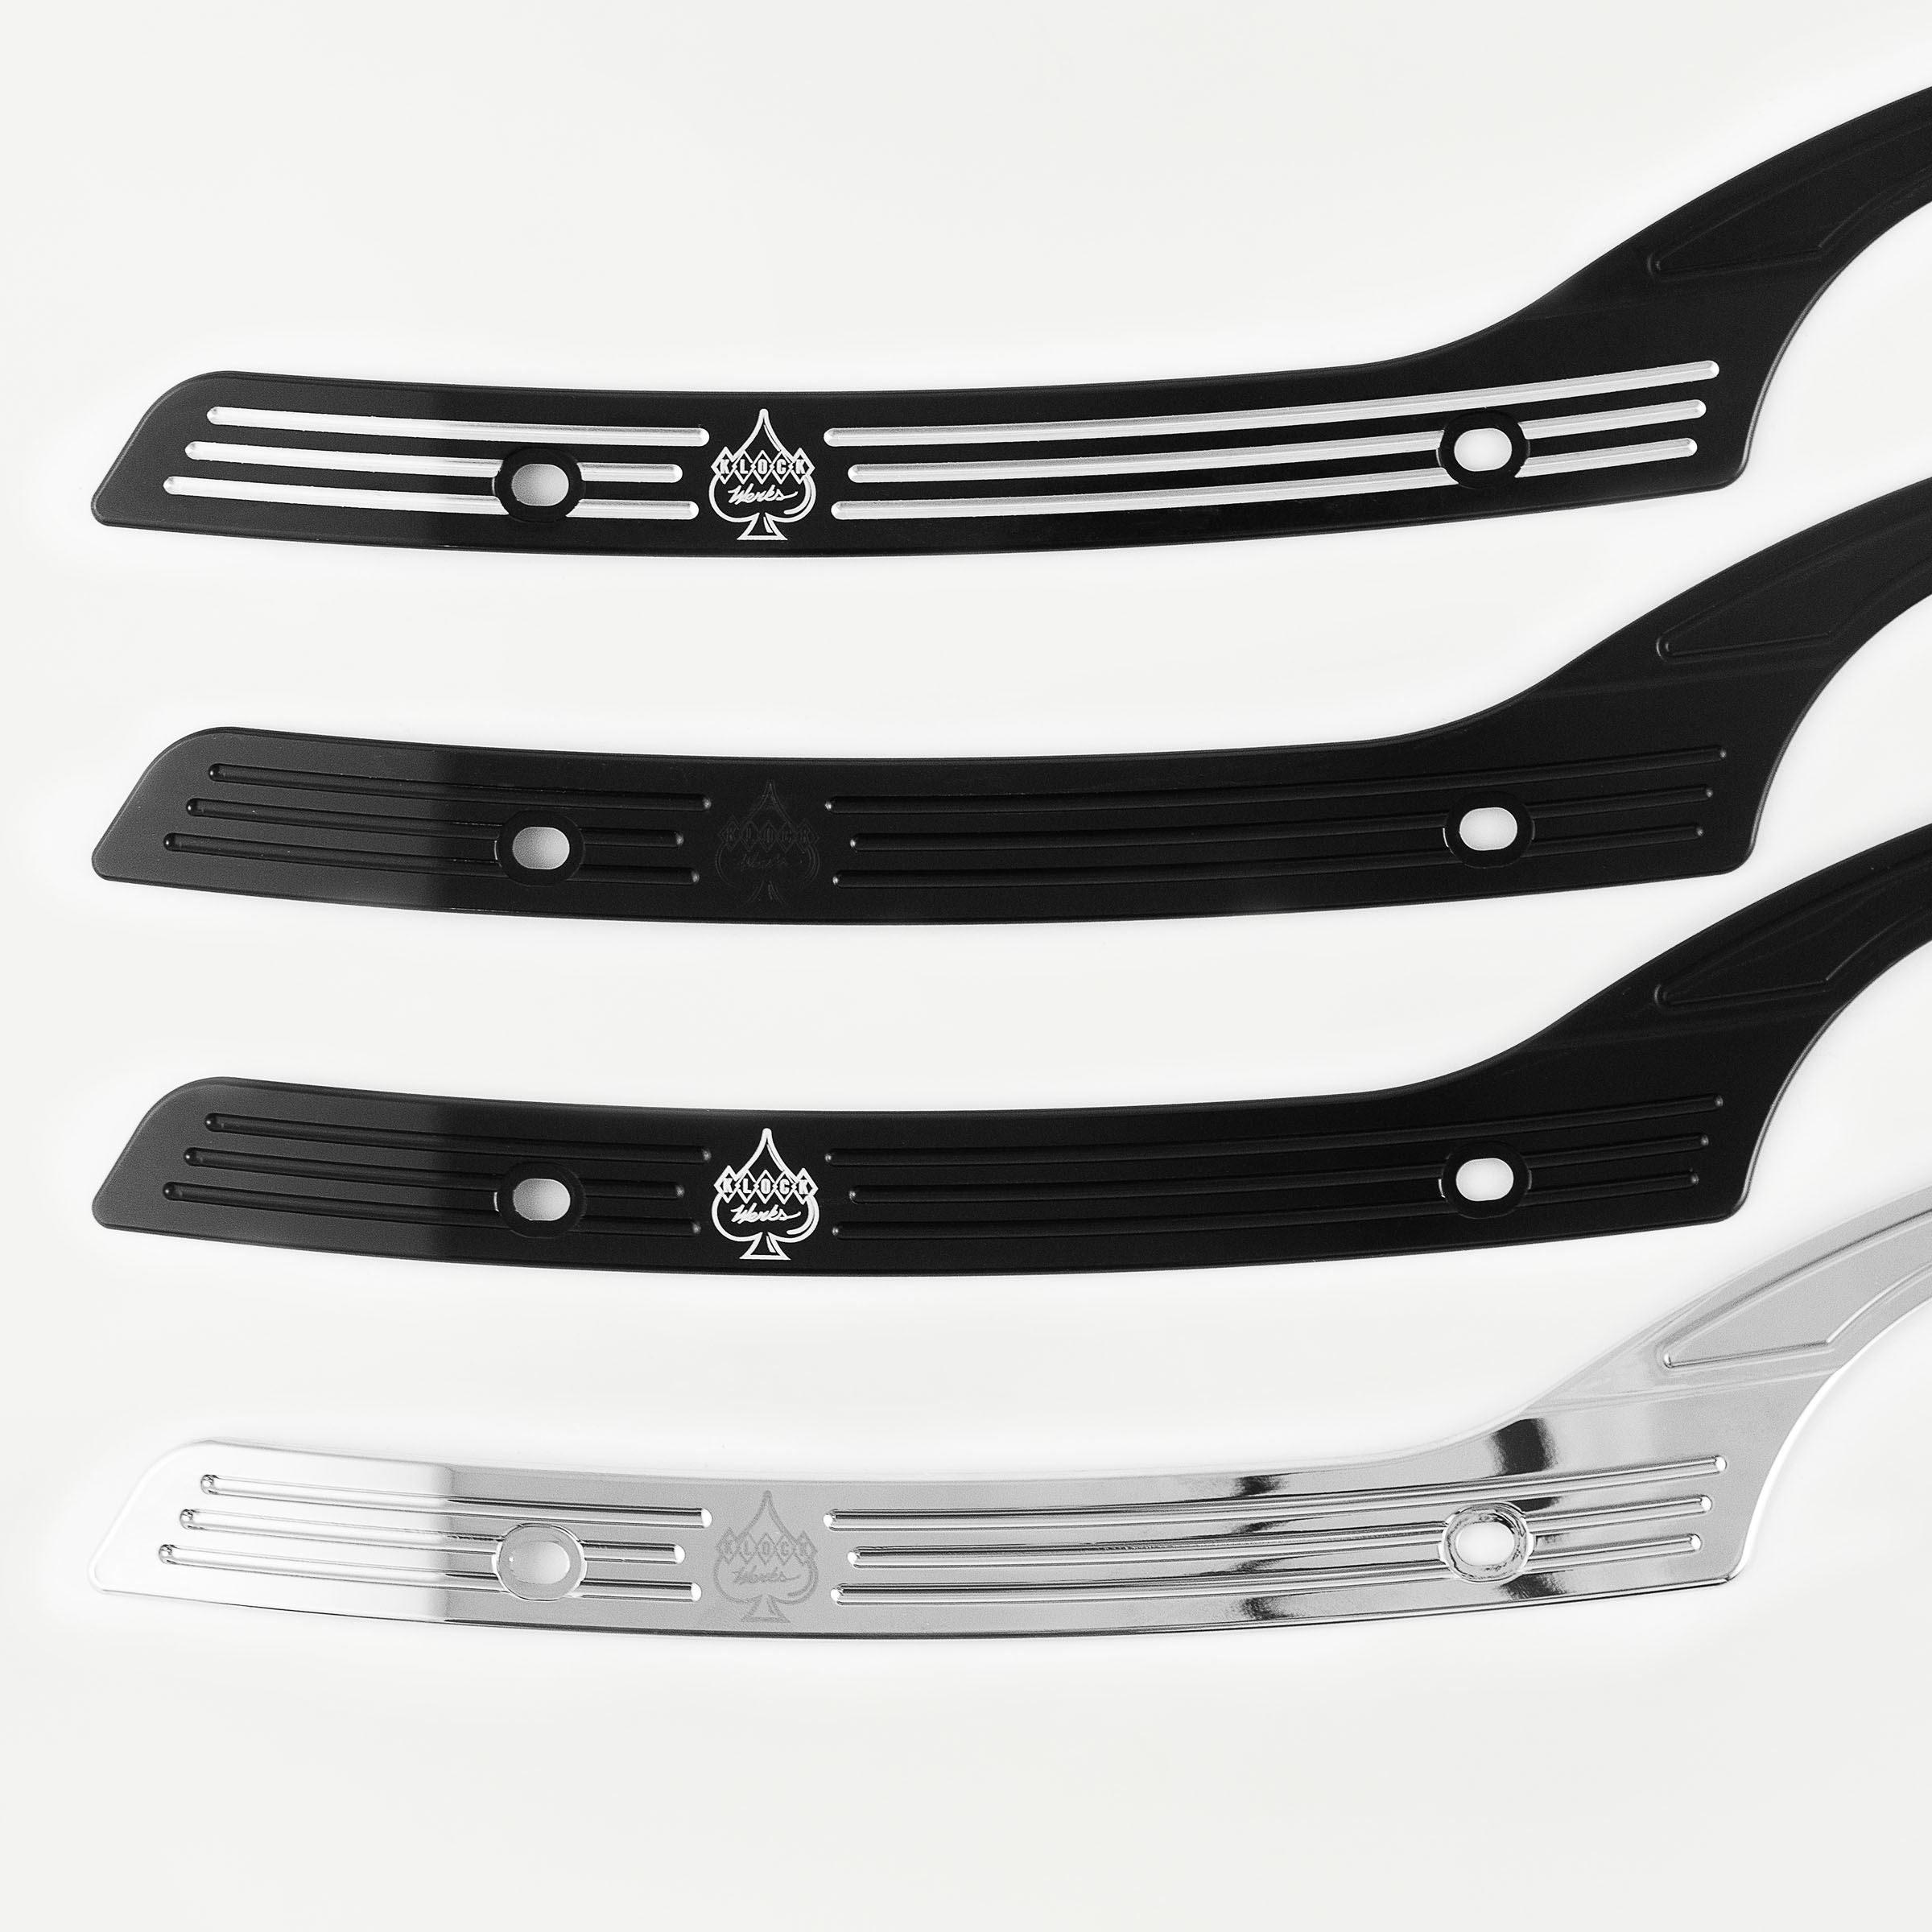 Windshield Trim for 2015-2023 Harley-Davidson Road Glide(Shown in order from top to bottom: Black Contrast, Black Out, Black w/Contrast Logo, Chrome)